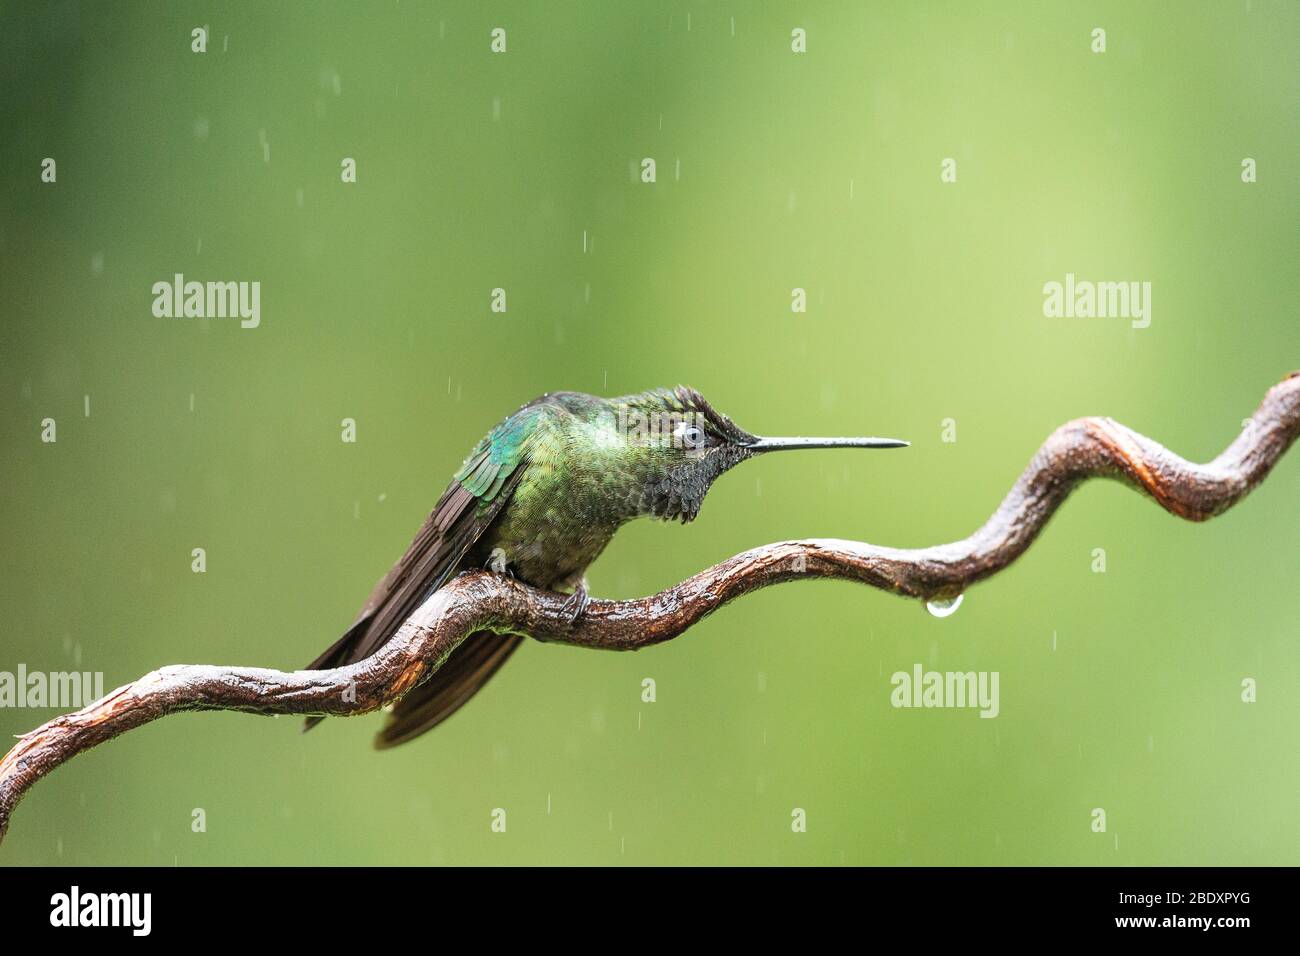 A Talamanca Hummingbird (Eugenes spectabilis) showing territorial behavoir on a curly branch in Costa Rica Stock Photo